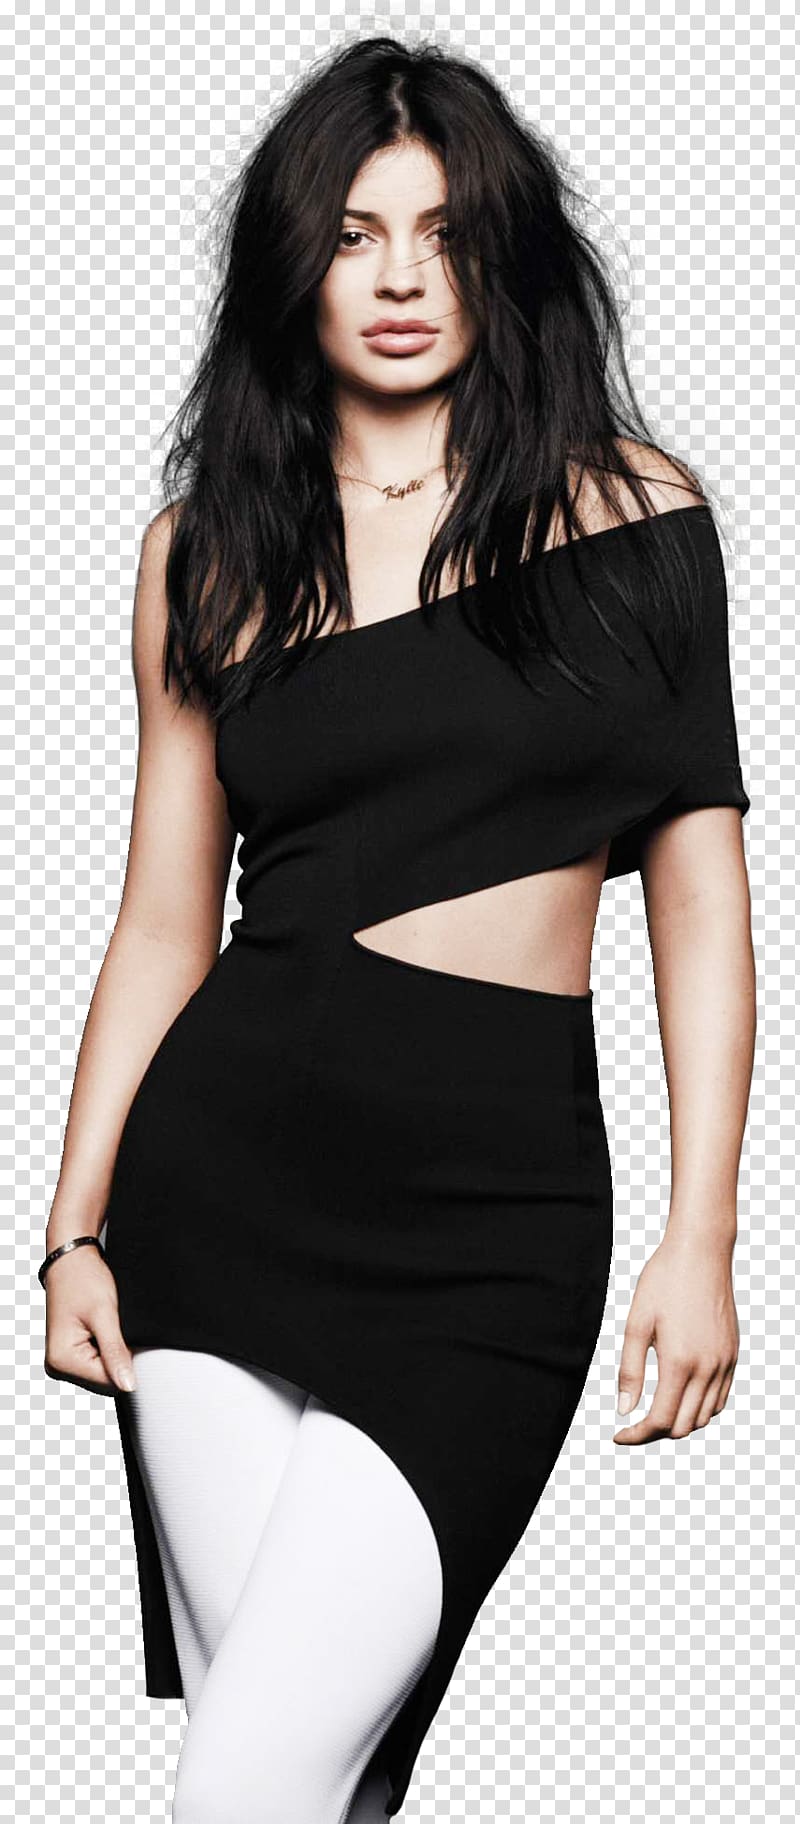 Kylie Jenner Keeping Up with the Kardashians T-shirt Fashion Female, kylie jenner transparent background PNG clipart